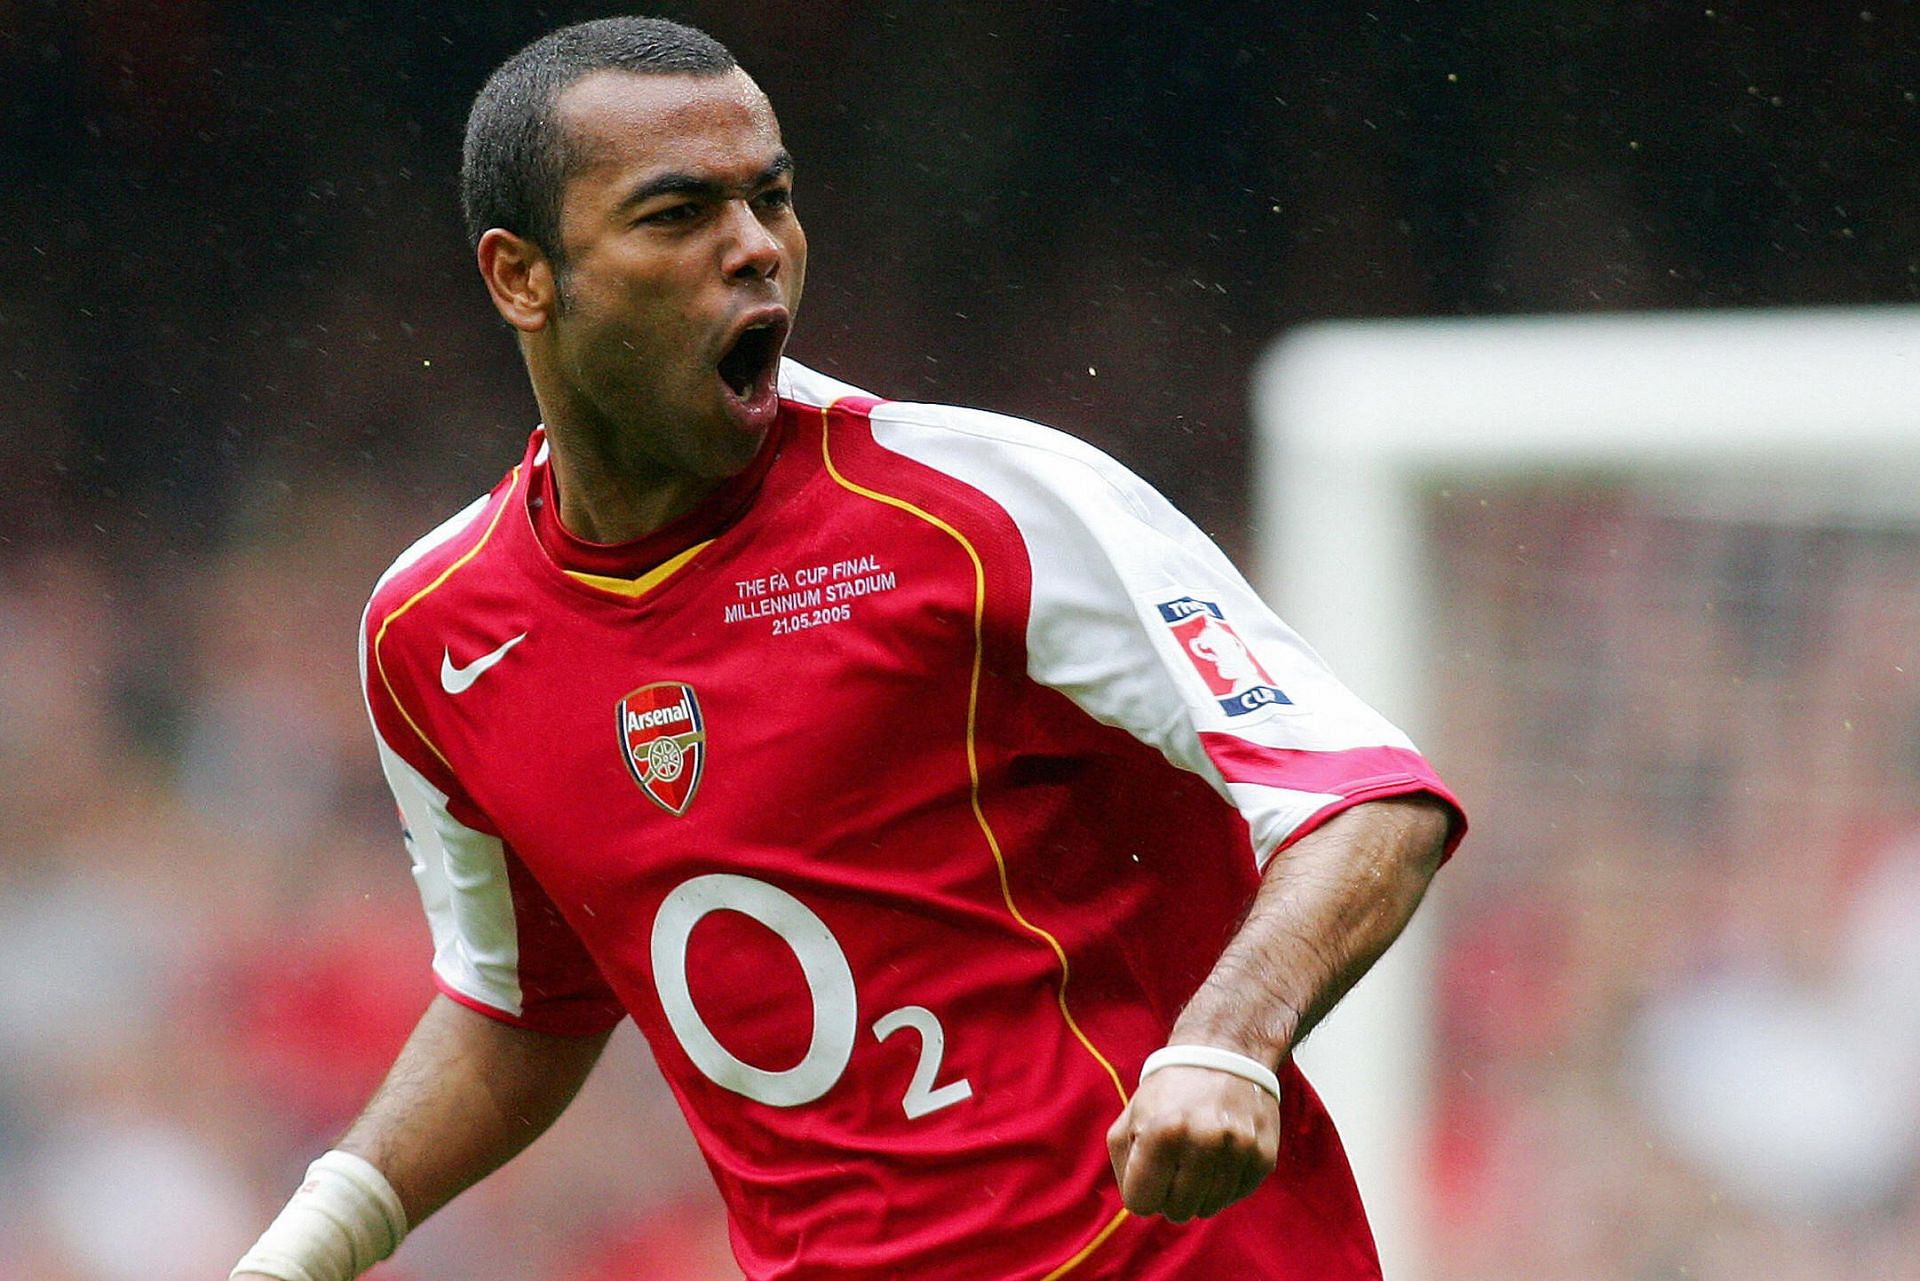 Cristiano Ronaldo has confessed that Ashley Cole was one of his hardest opponents